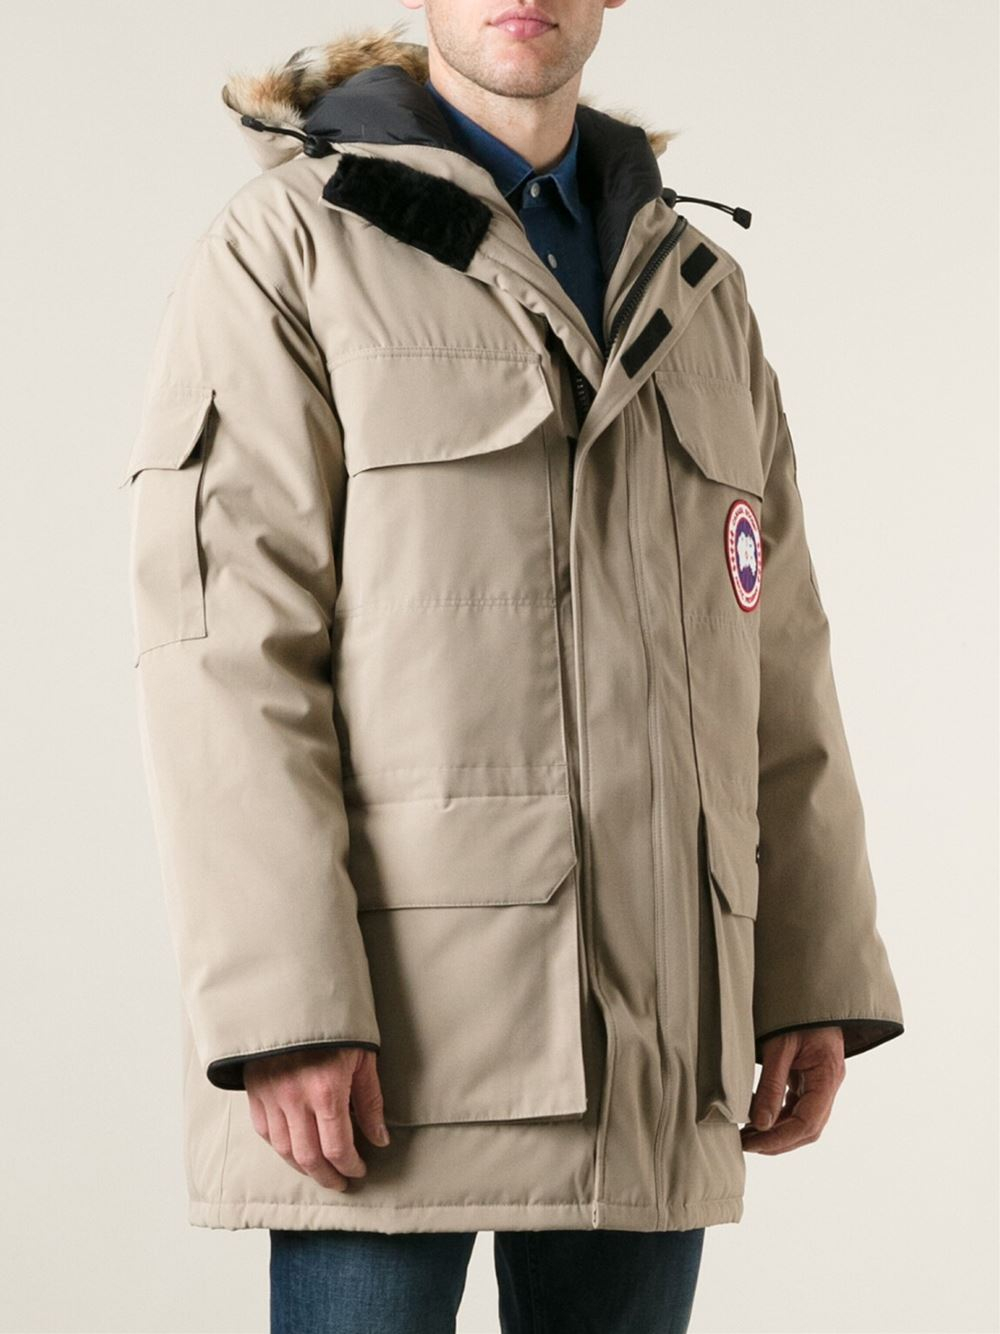 Canada Goose 'Expedition' Parka in Brown for Men - Lyst